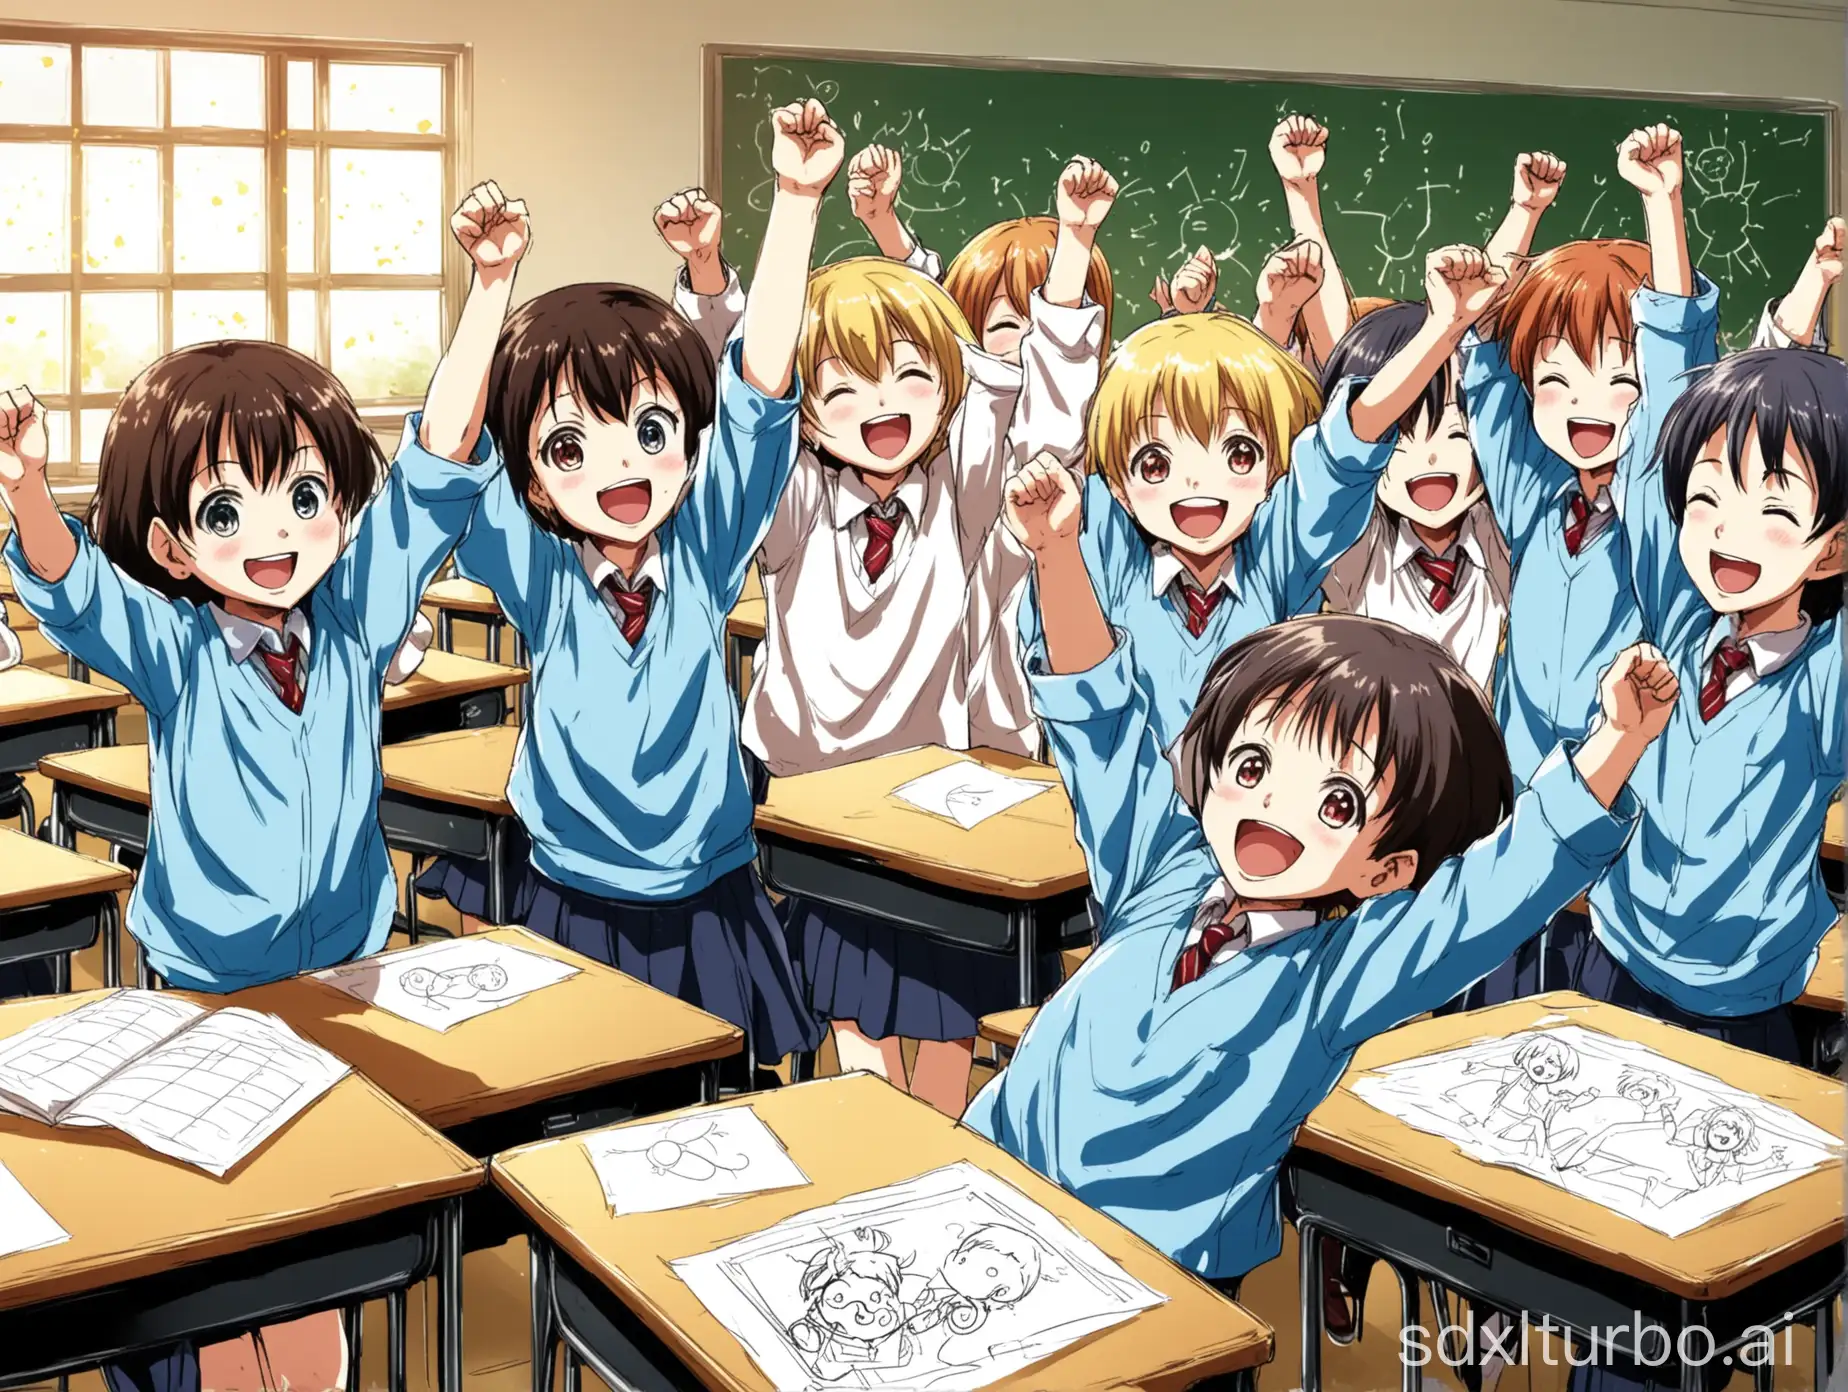 Draw an image of children on a classroom happily celebrating after successfully completing an experiment, the more exaggerated the better, in a two-dimensional anime style.